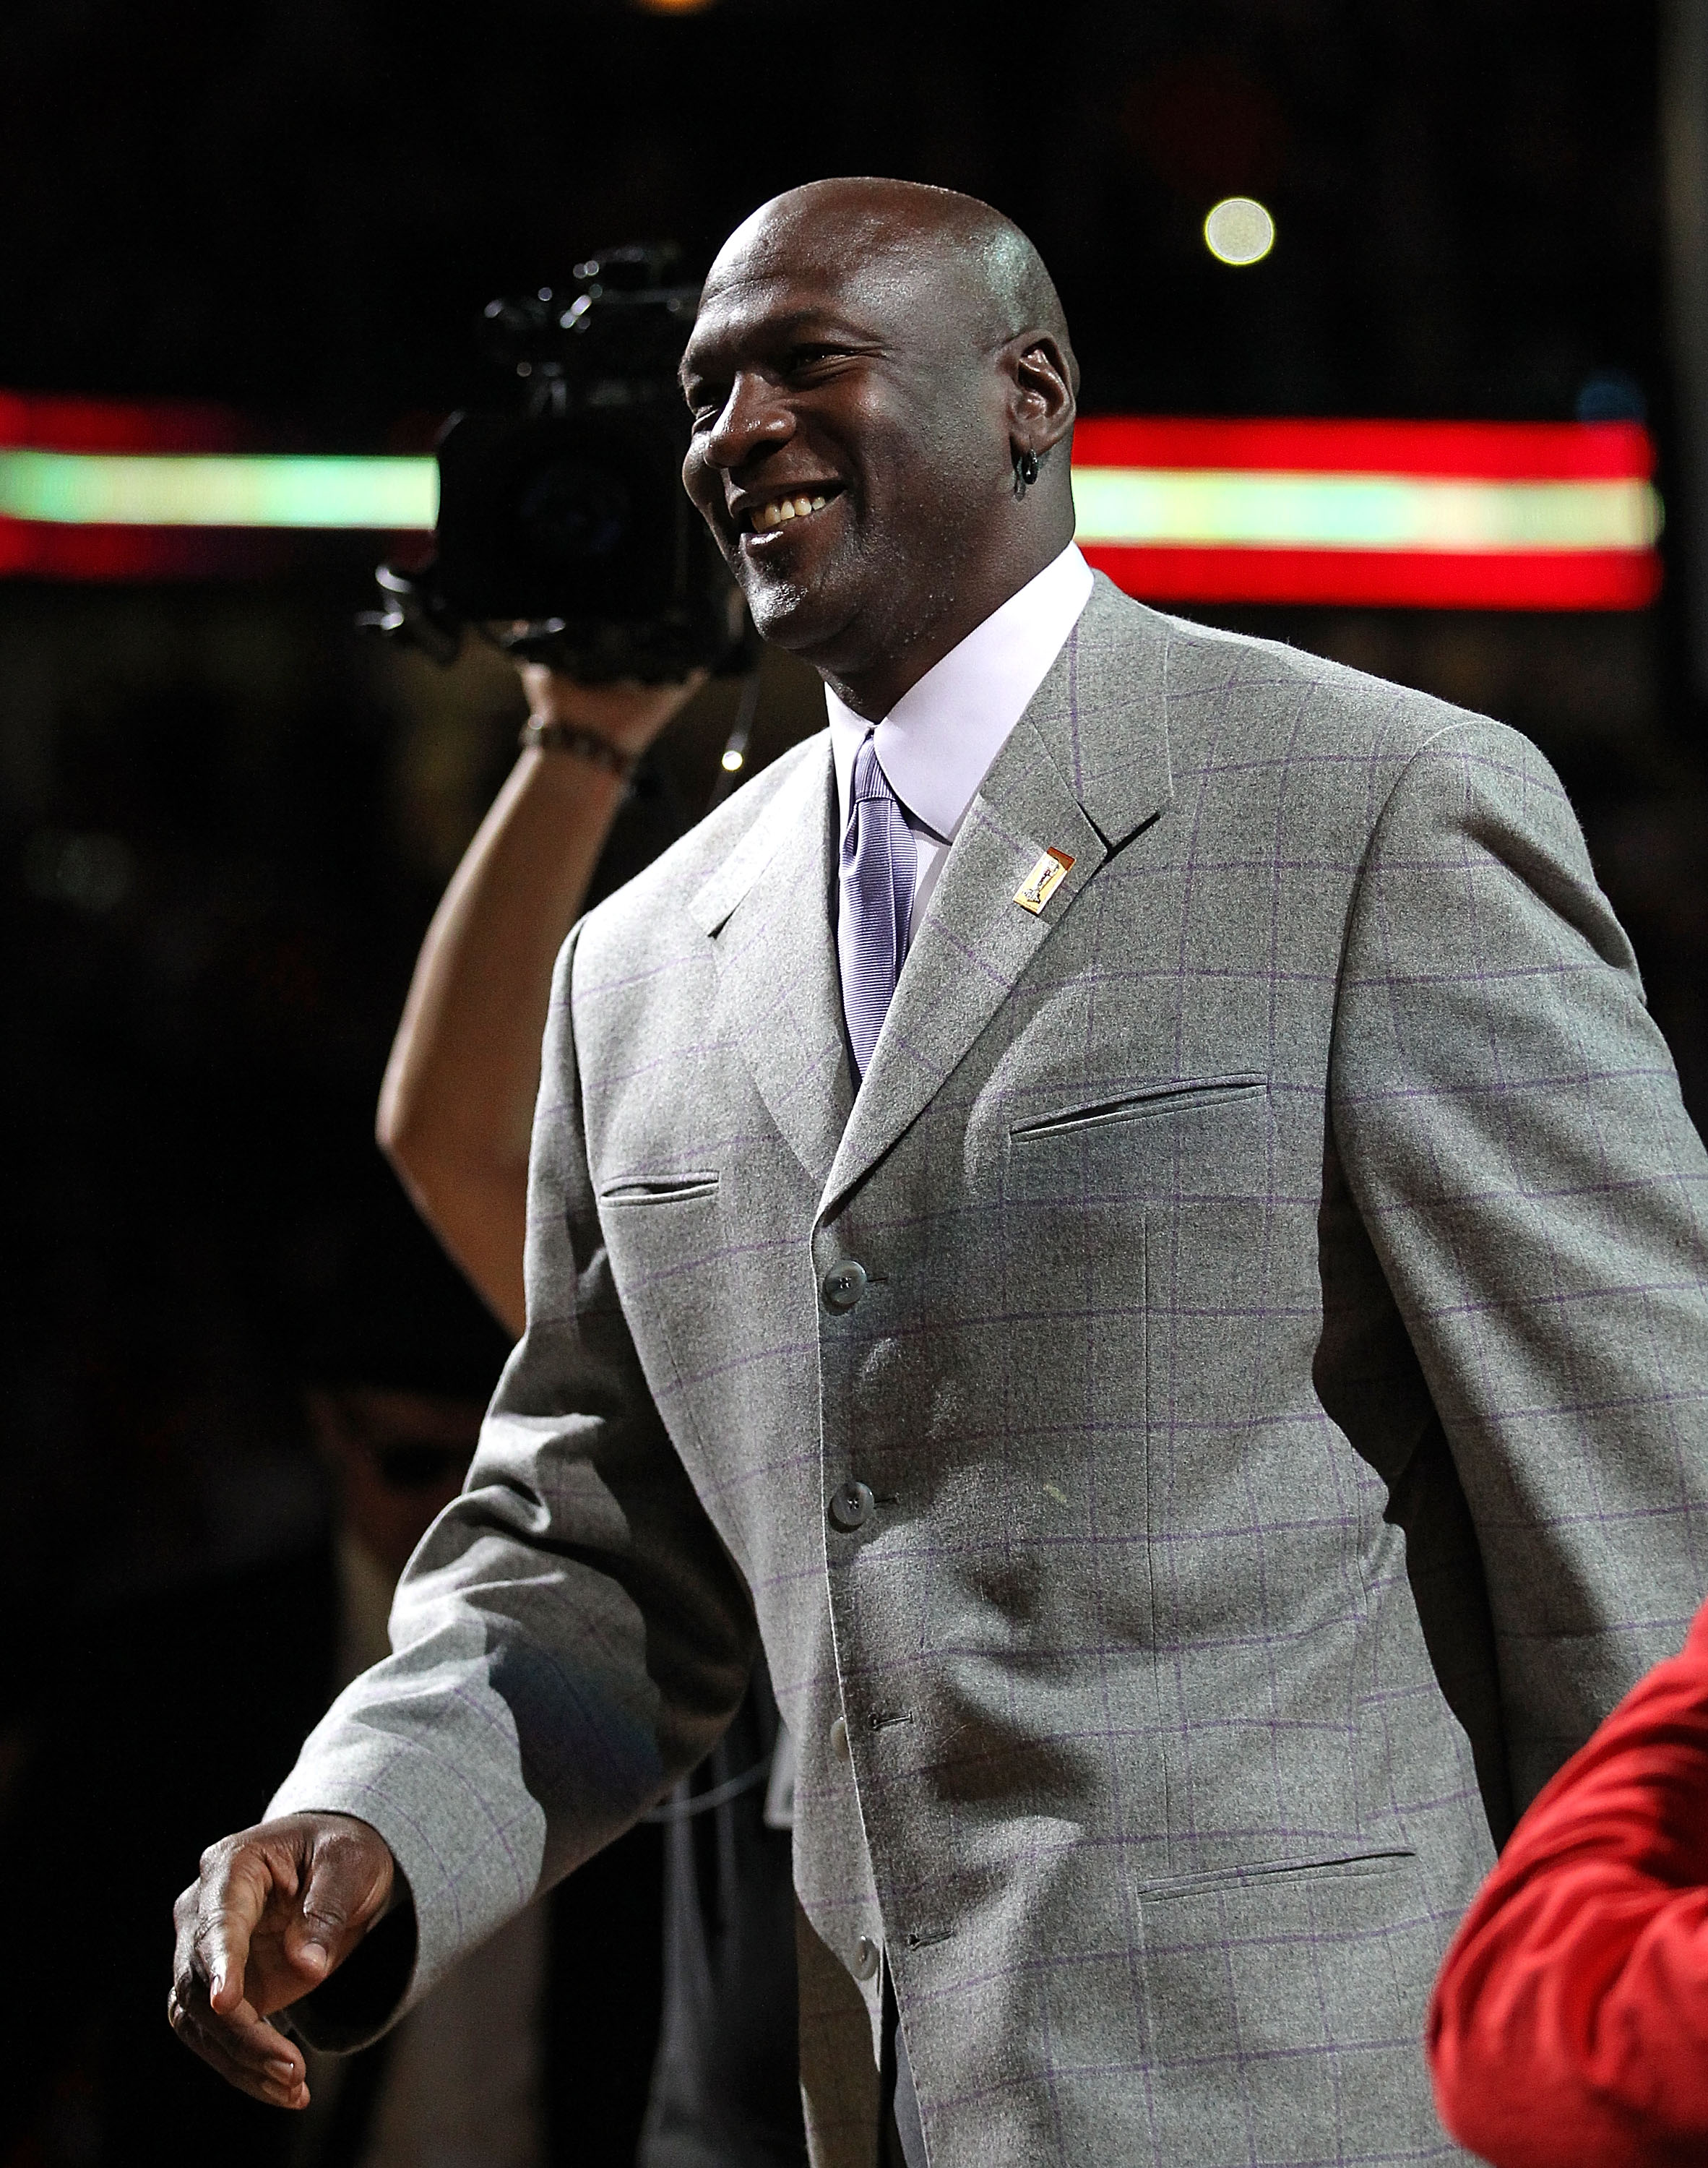 CHICAGO, IL - MARCH 12: Former player Michael Jordan of the Chicago Bulls smiles as he is introduced to  the crowd during a 20th anniversary recognition ceremony of the Bulls 1st NBA Championship in 1991 during half-time of a game bewteen the Bulls and th